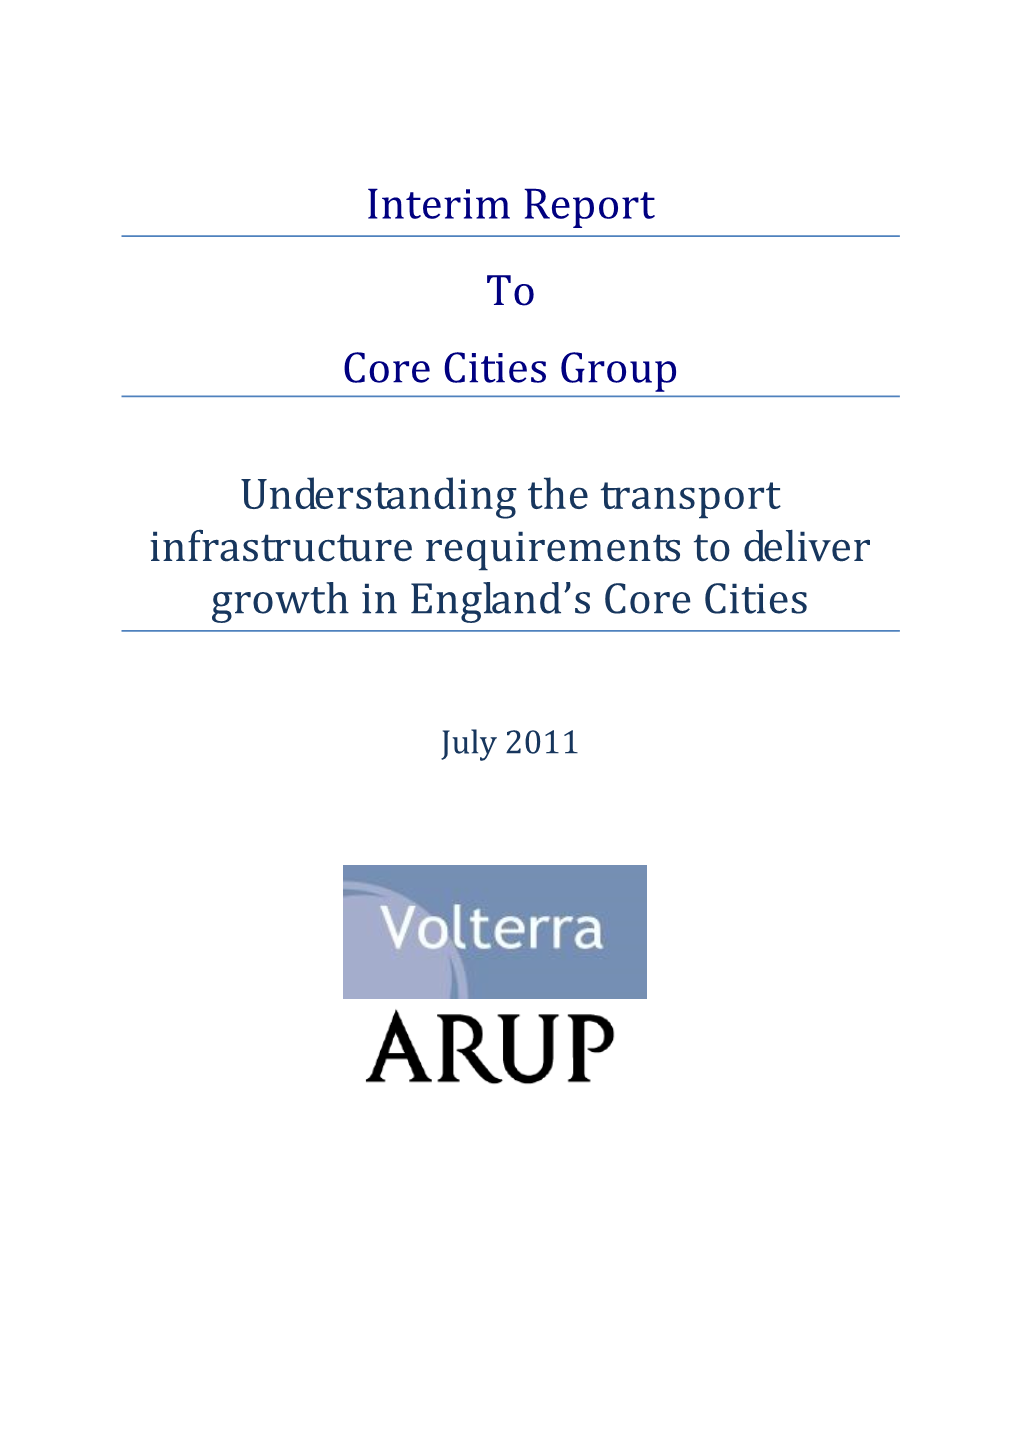 Interim Report to Core Cities Group